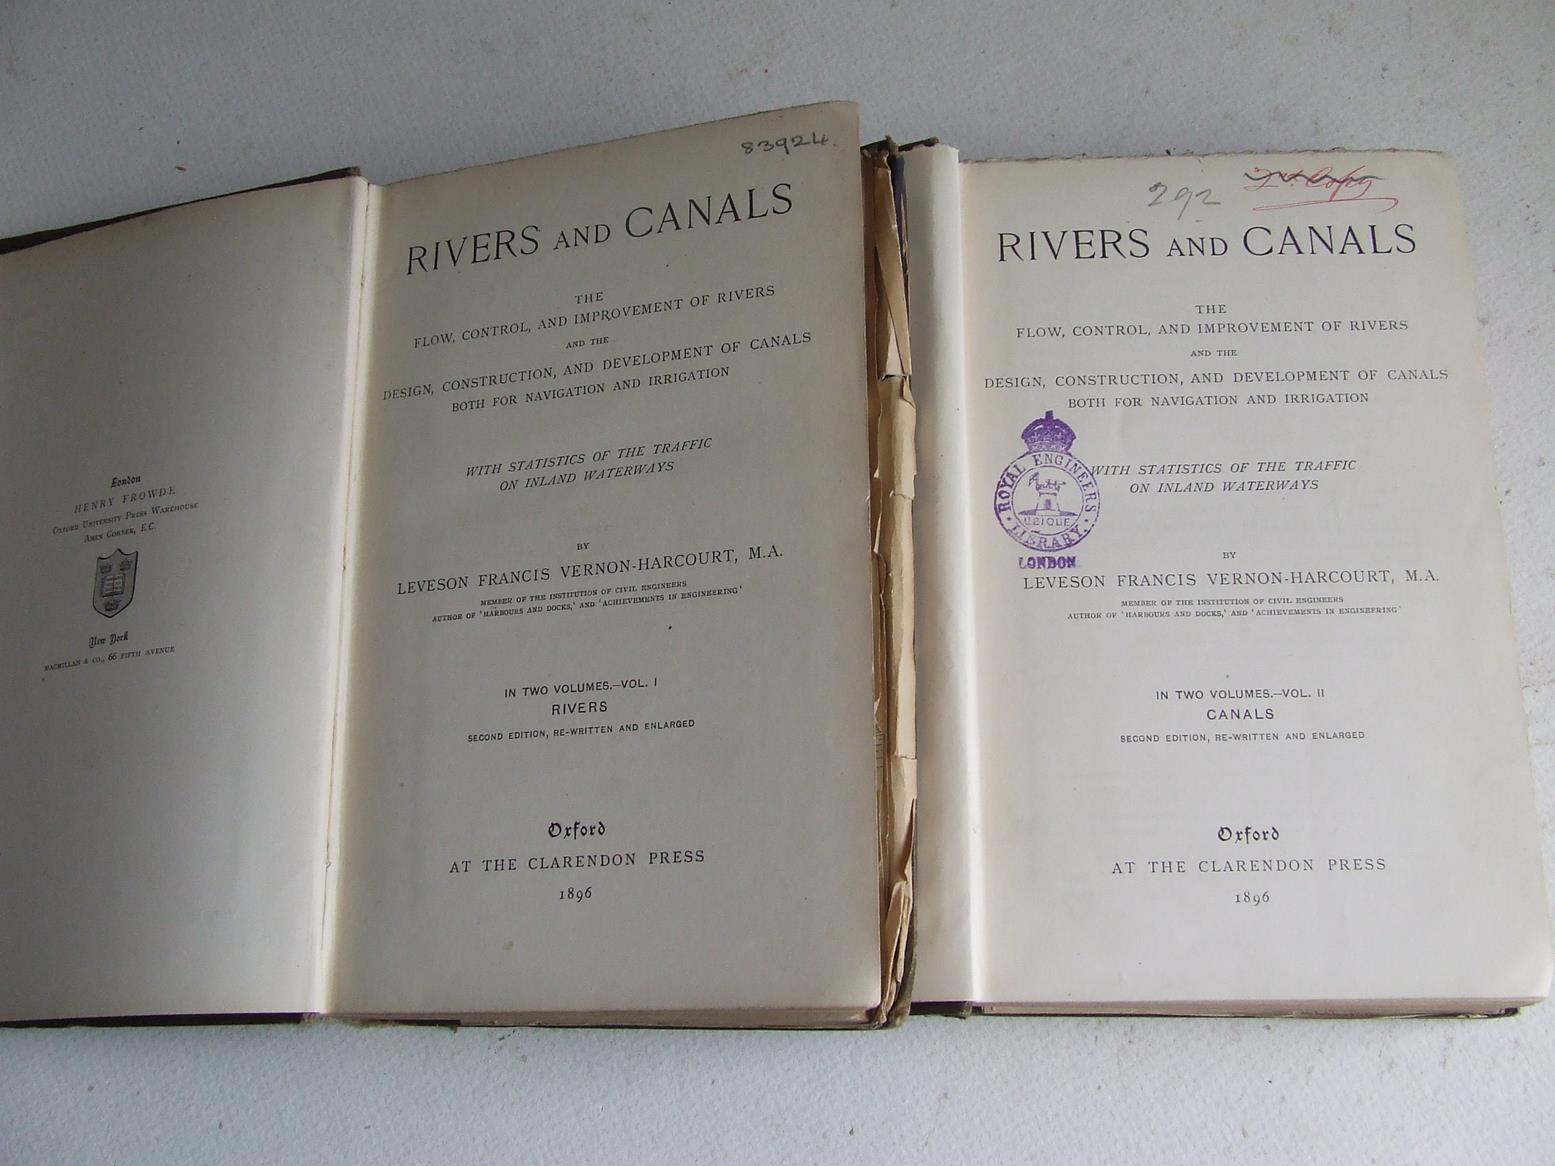 Rivers and Canals